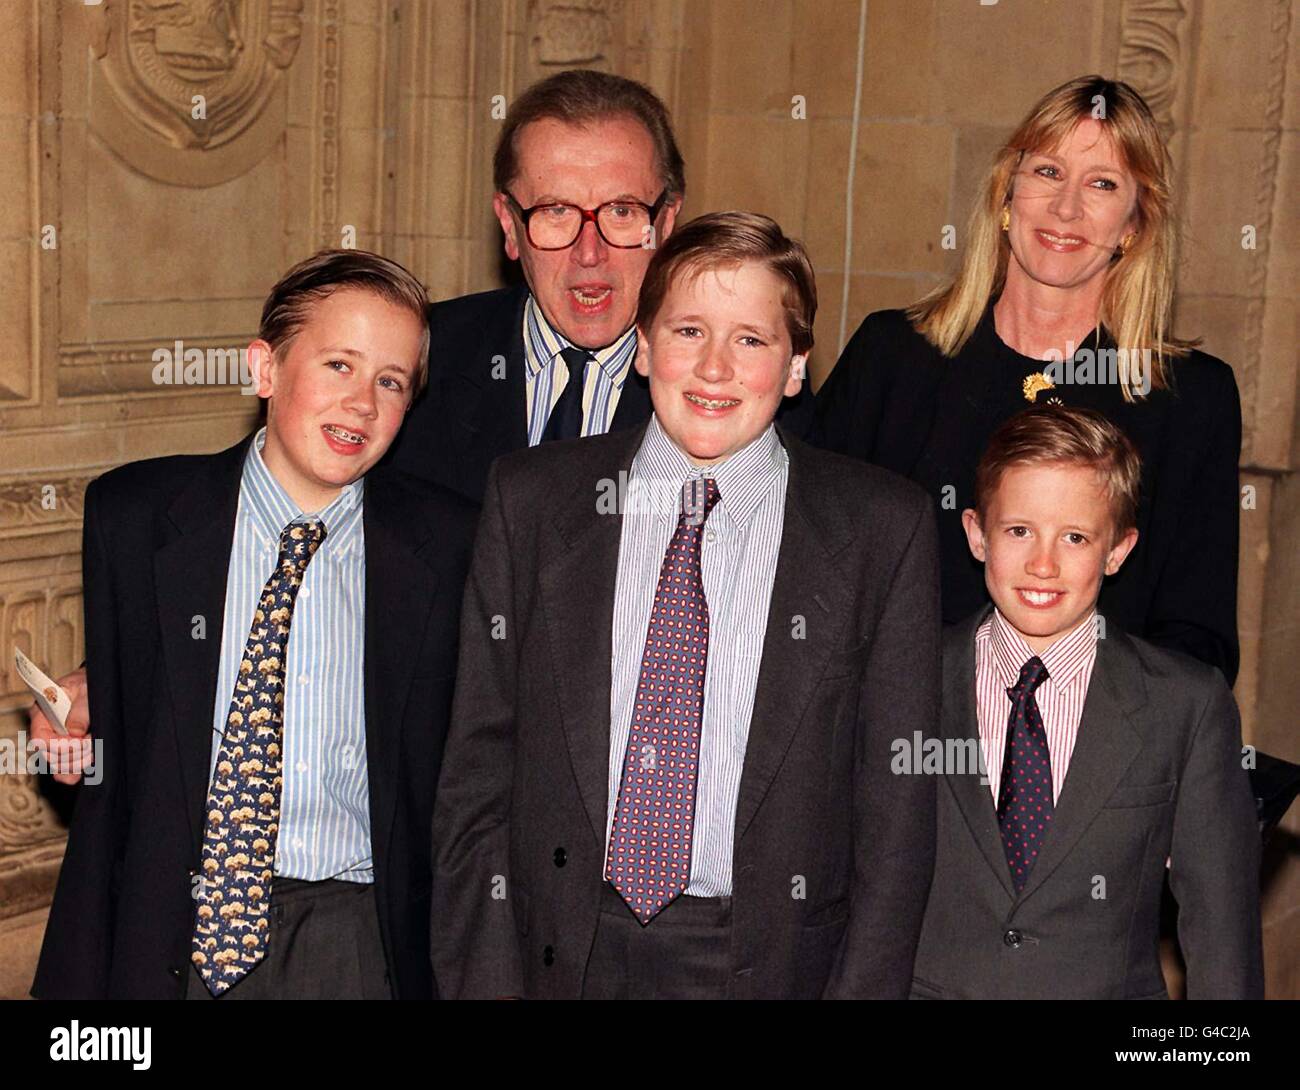 Sir David and Lady Carina Frost and their three son's (l/r) Wilfred, Miles and George, arriving for the conert of Lord Andrew lloyd Webber's music to celebrate the composer's 50th birthday at the Royal Albert Hall in london this evening (Tuesday). Photo by Neil Munns/PA. Stock Photo